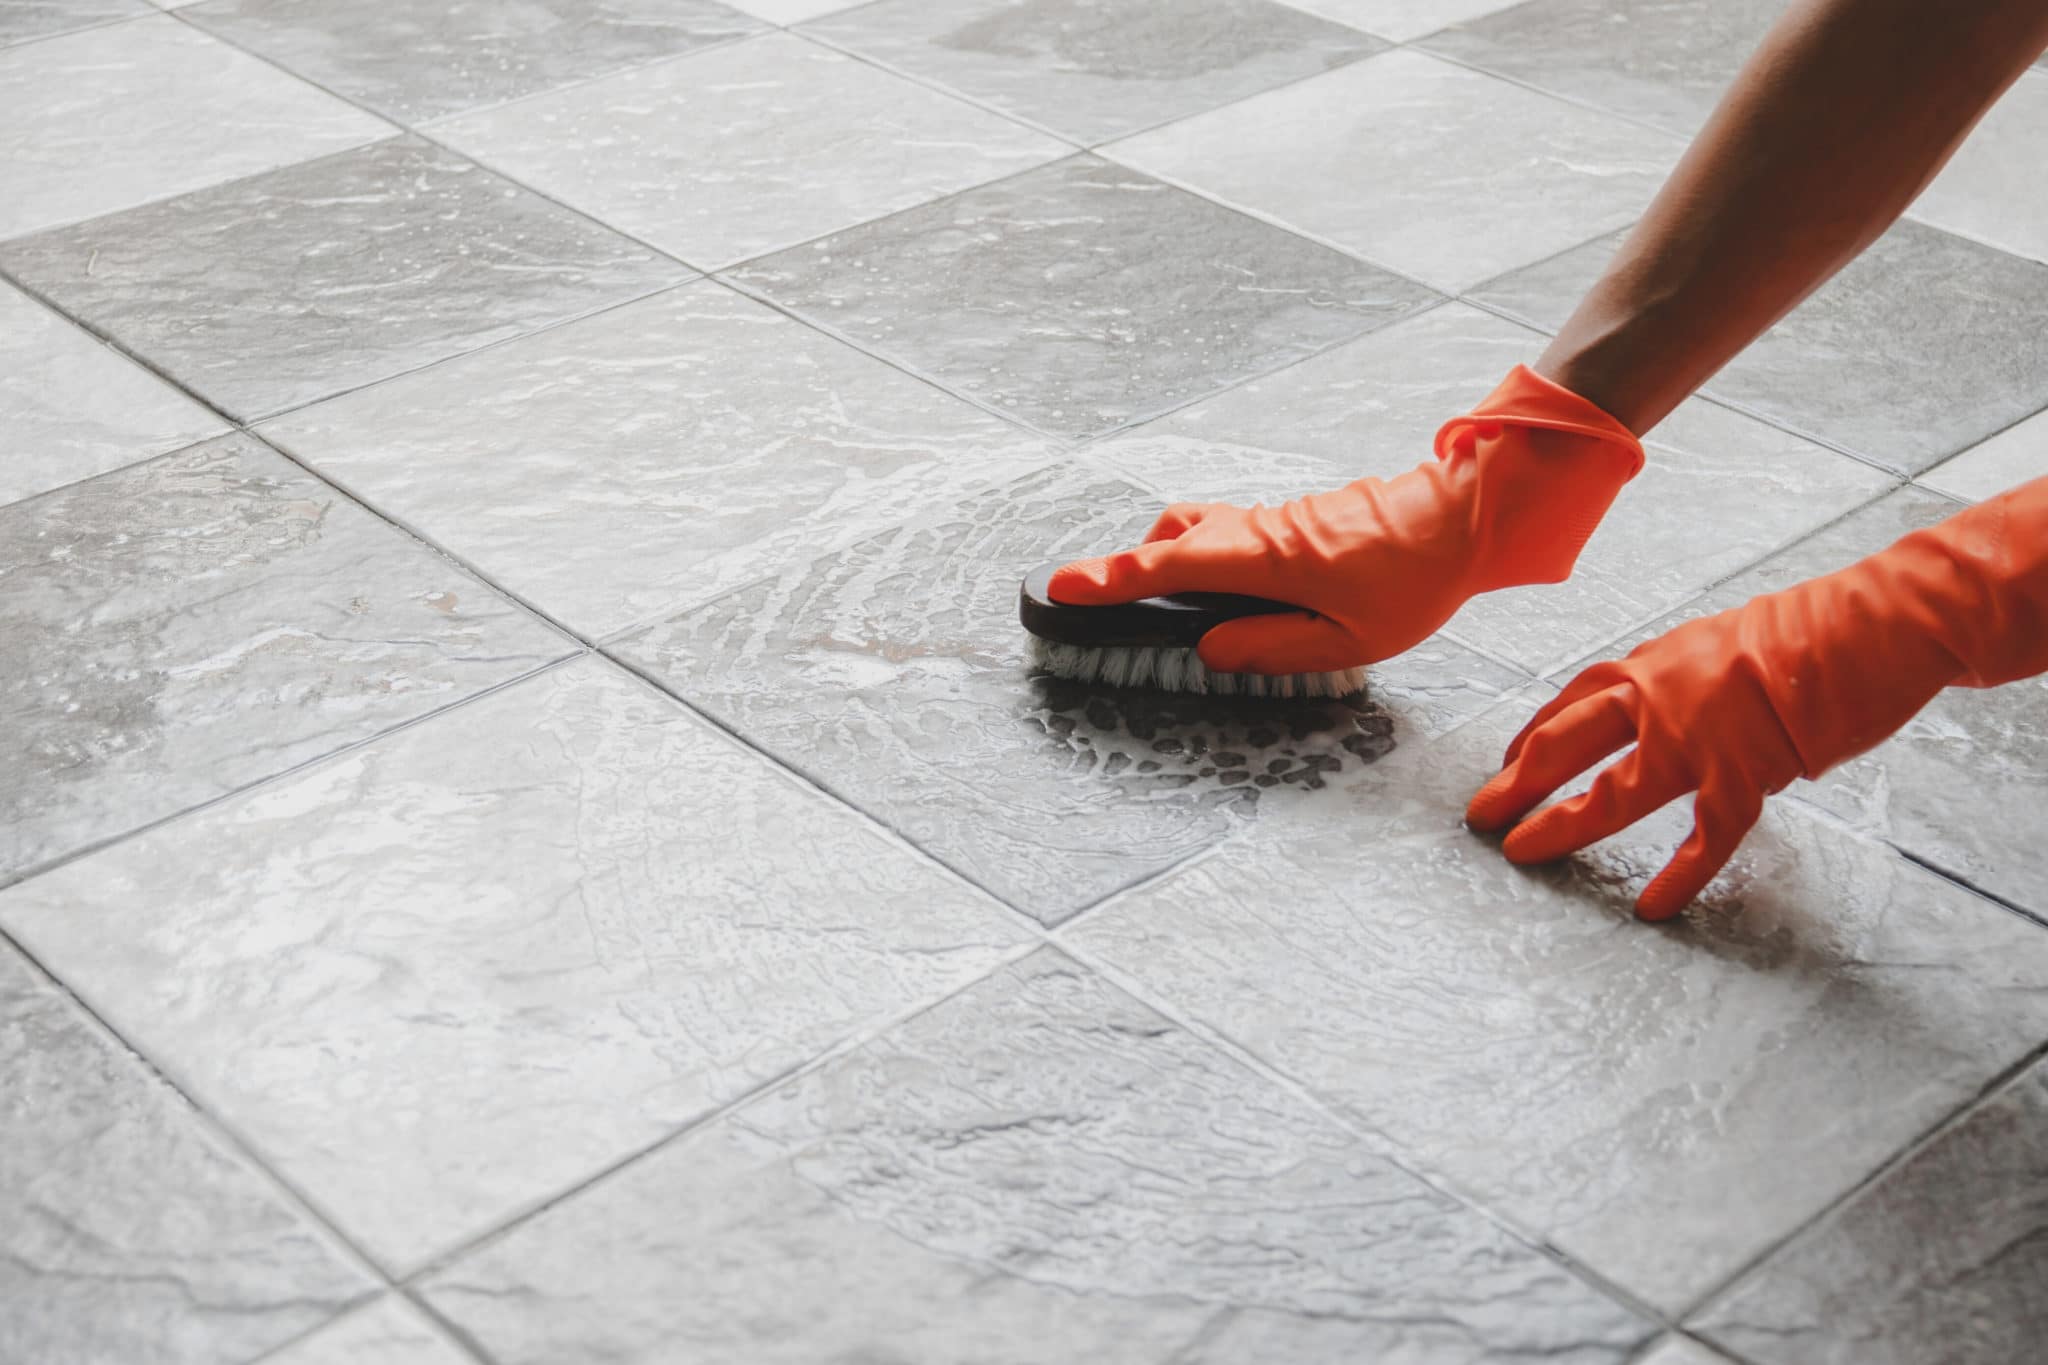 Step by step guide on how to clean porcelain tiles - Exterior